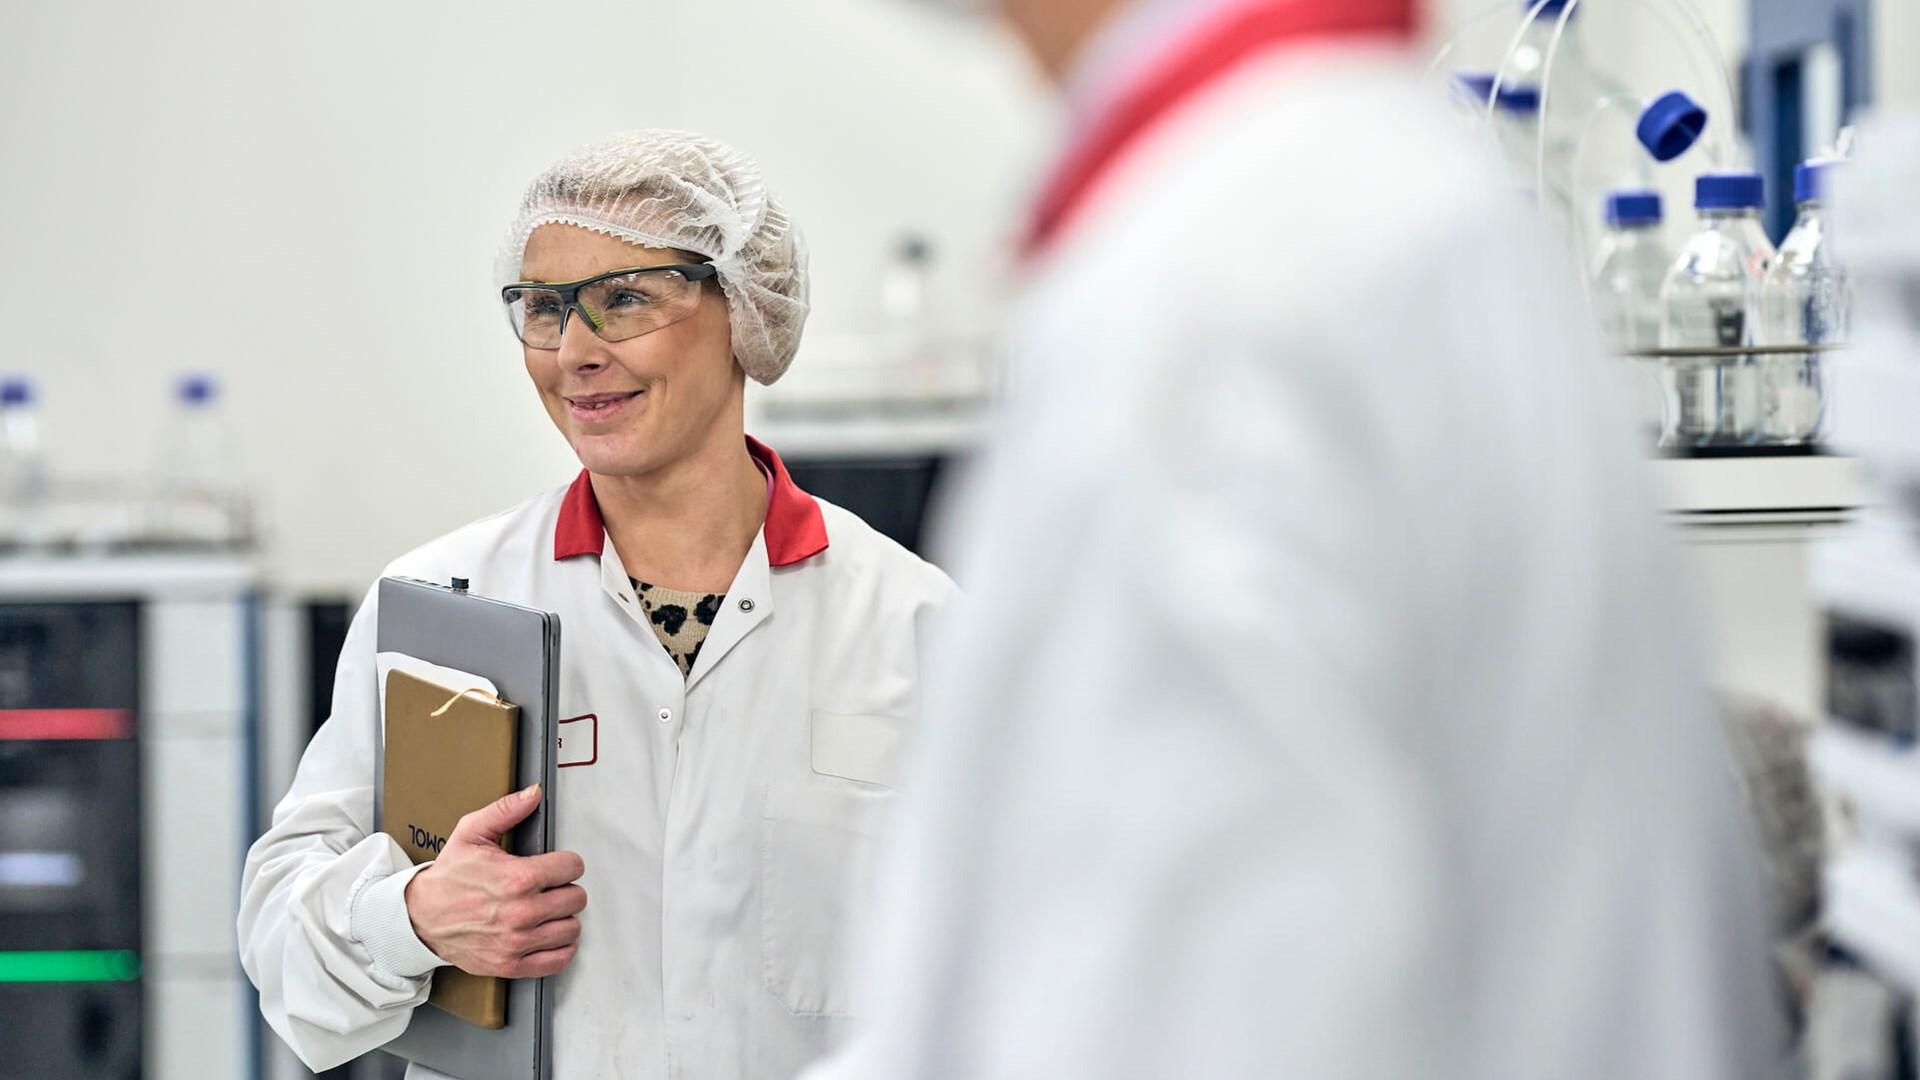 Two Reckitt employees working in a lab, wearing hairnets, safety glasses and a lab coat. One carries a clipboard and notebook.